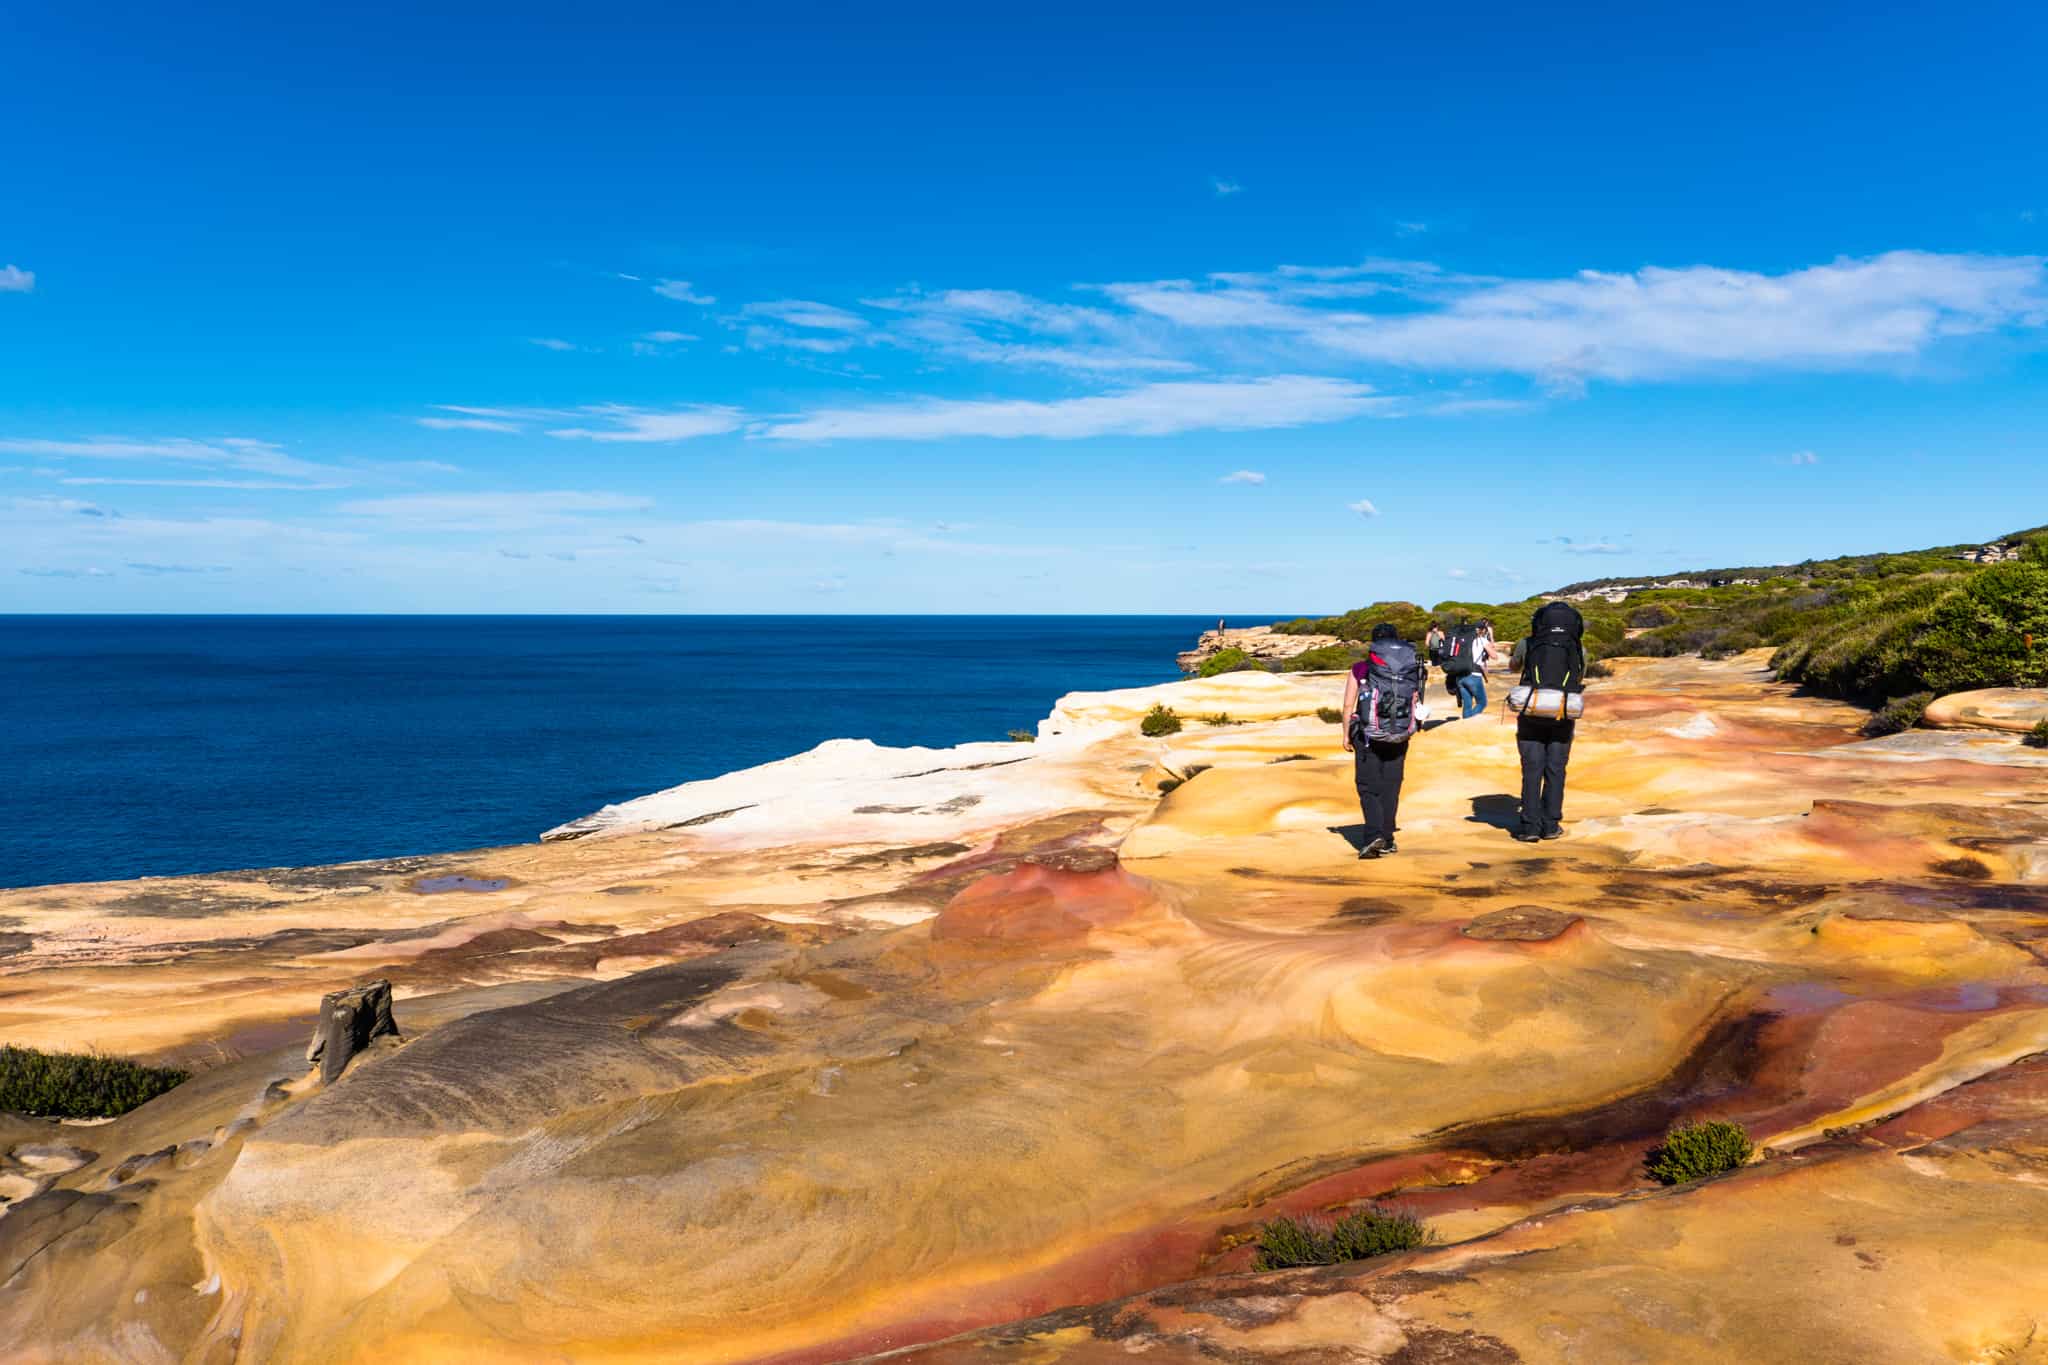 Colourful sandstone offsets the blue ocean and sky on the Coast Track in Royal National Park.